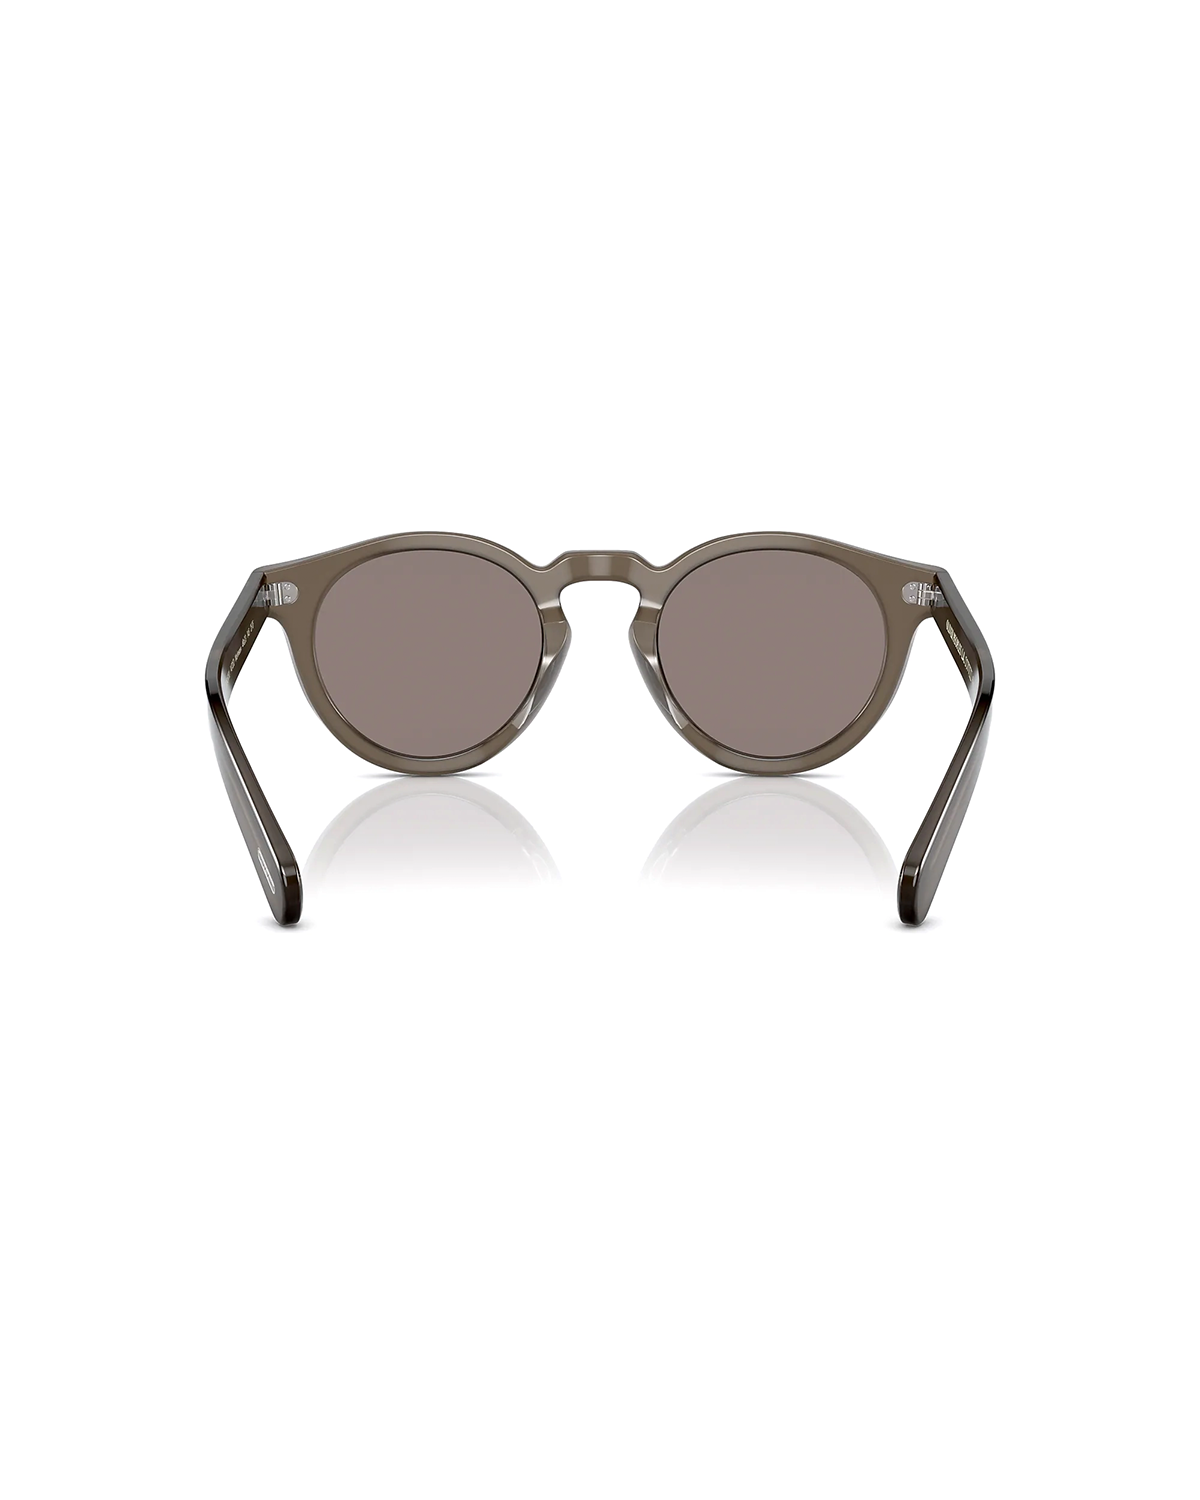 Martineaux Taupe With Chrome Taupe Photochromic Lens